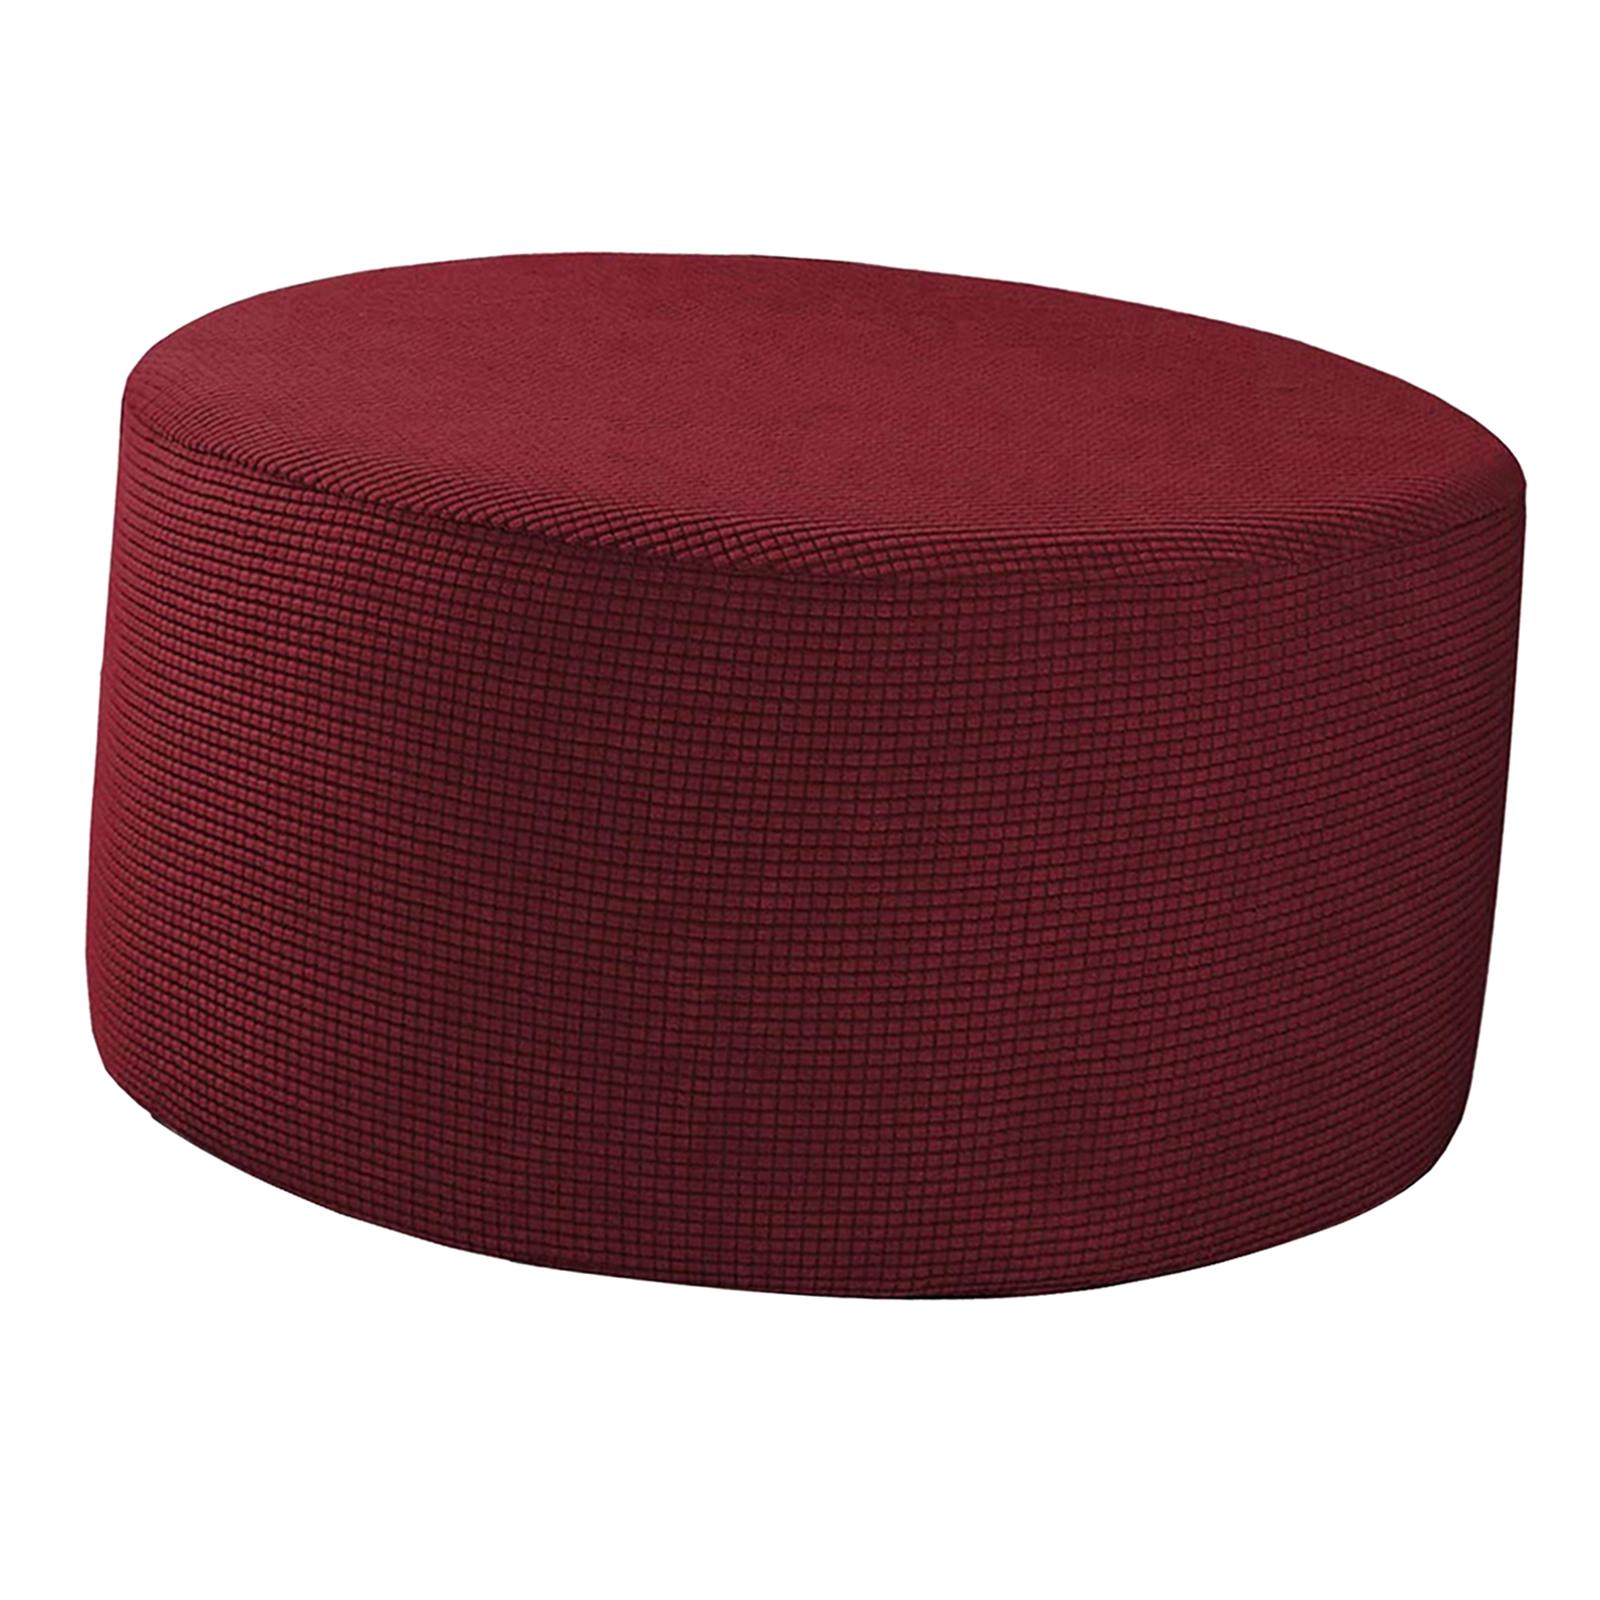 Ottoman Slipcovers Round Ottoman Footstool Cover Removable Red - image 4 of 6